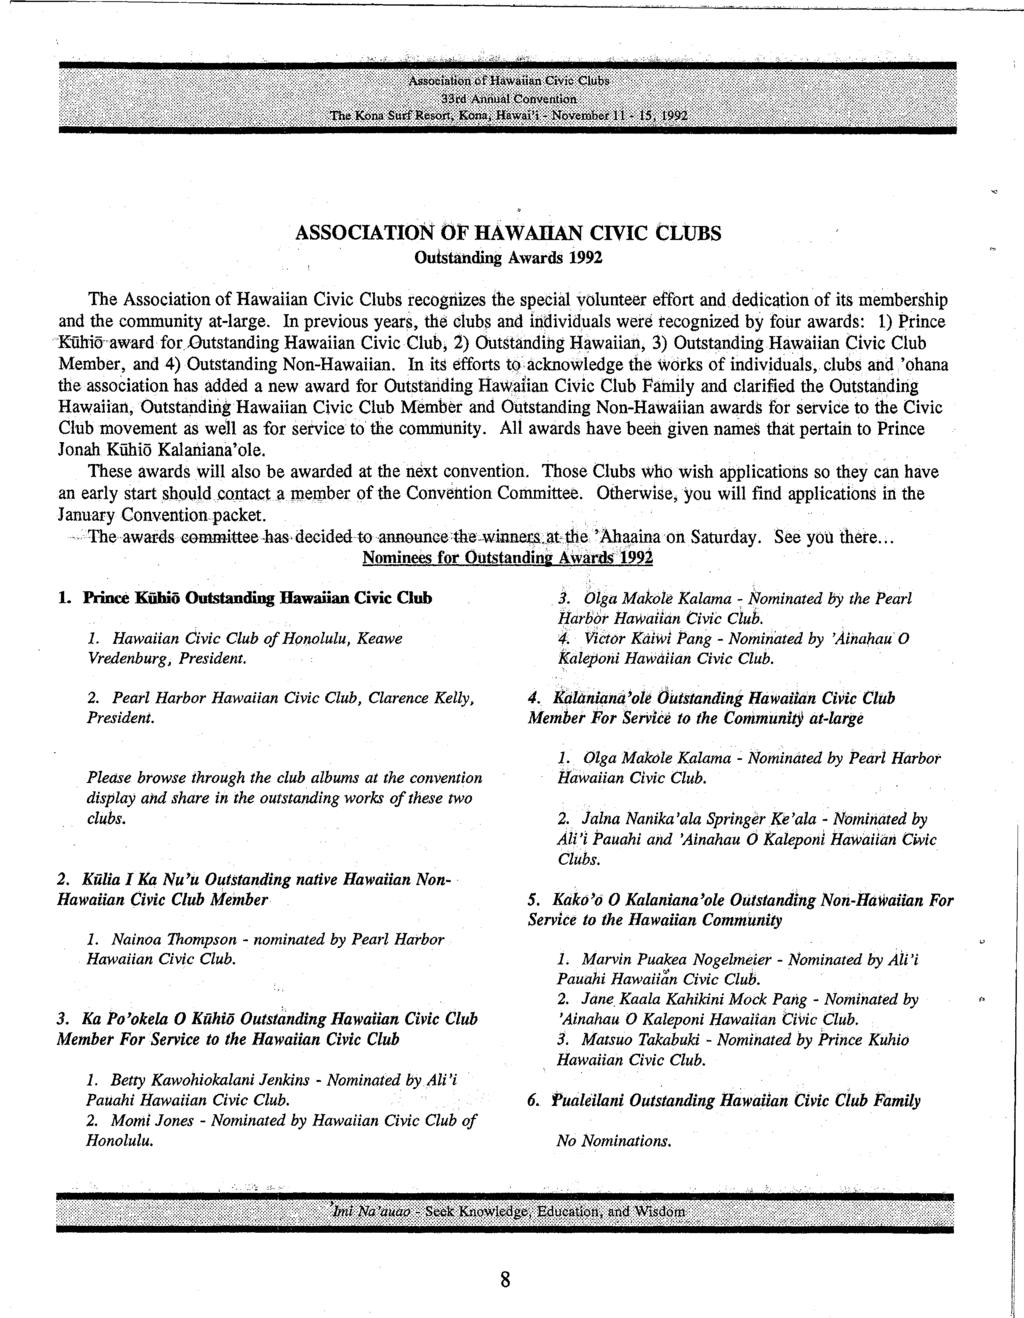 ASSOCIATION OF HAWAHAN CIVIC CLUBS Ouistanding Awards 1992 The Association of Hawaiian Civic Clubsrecognizes thesp~chll volunteer effort and. dedication of its membership and the community at-large.